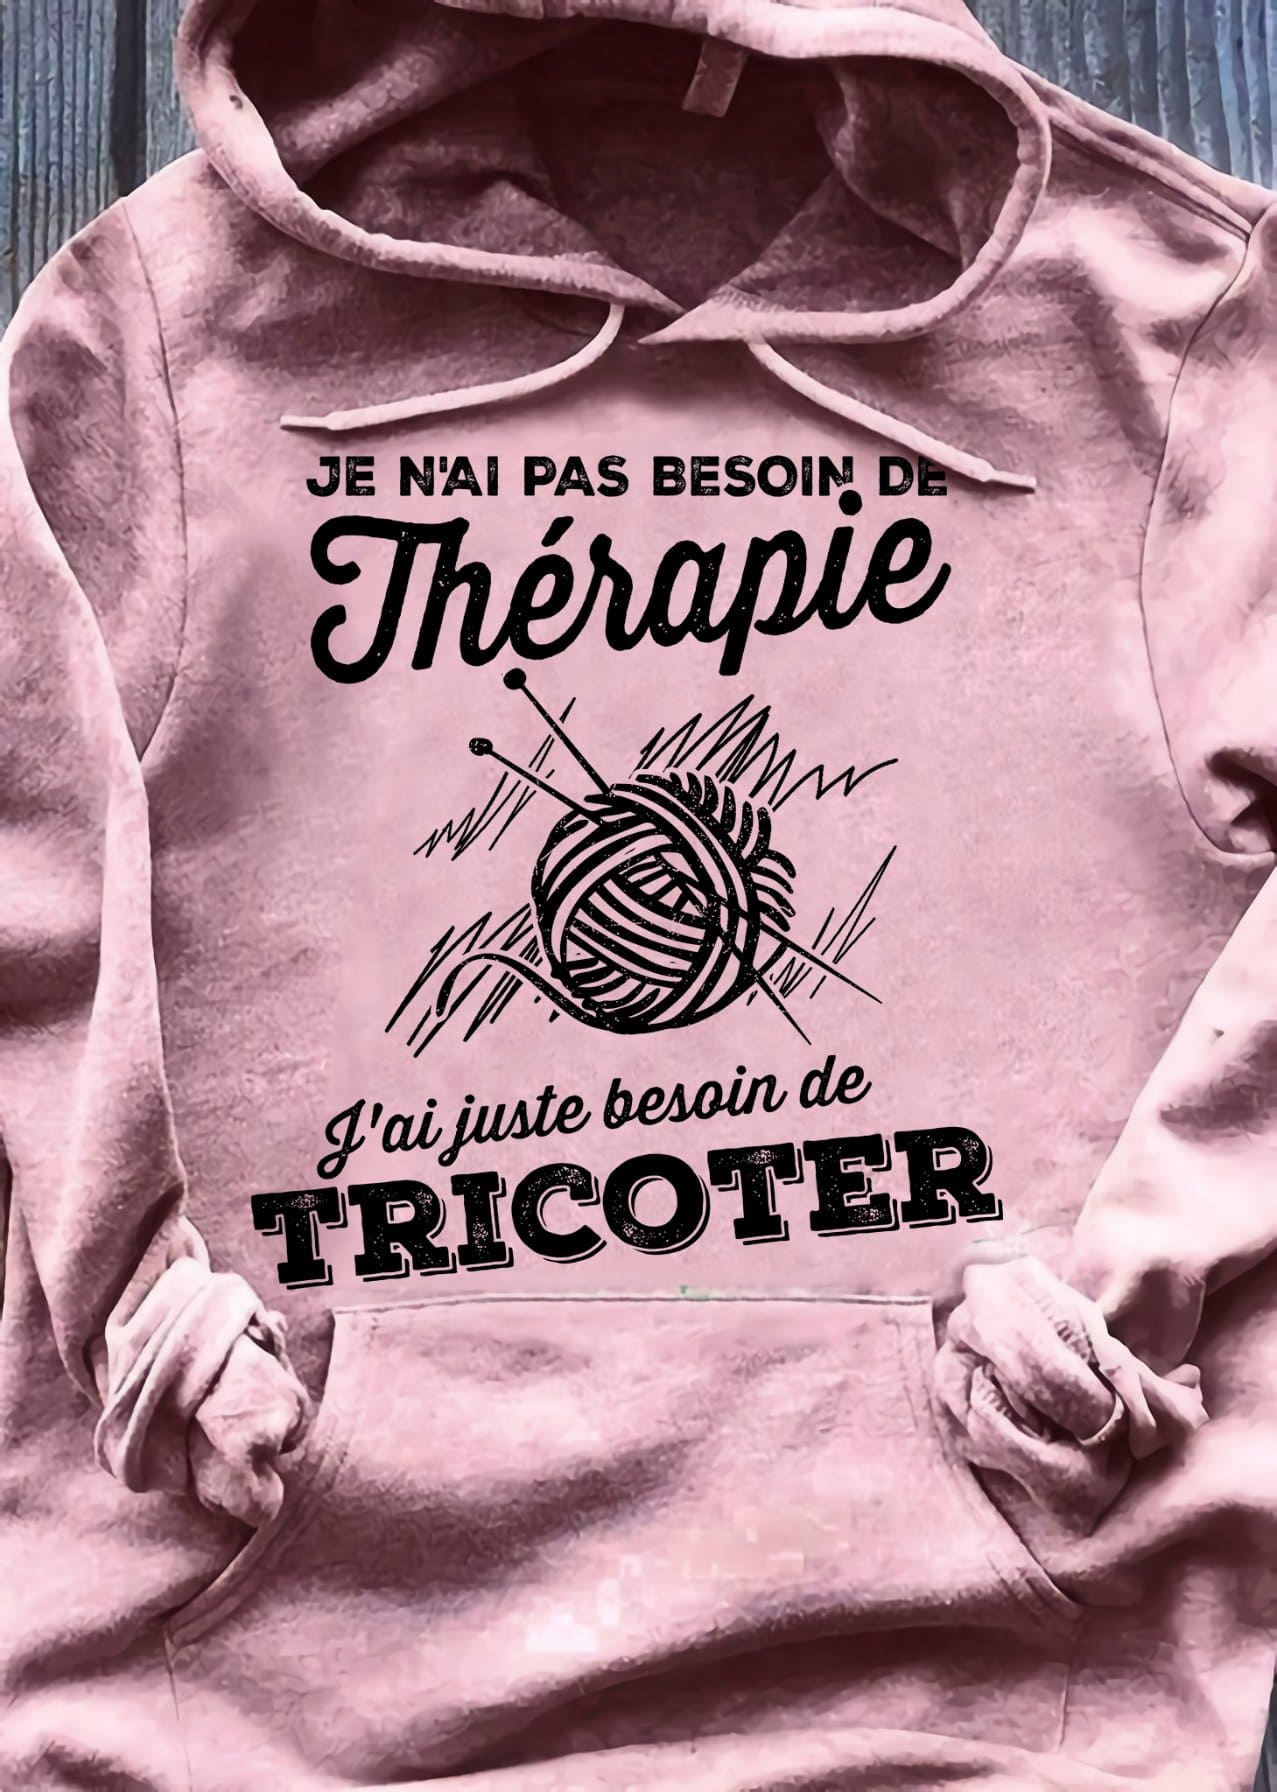 Je nai pas besoin de therapie - Love sewing yarn, crocheting the hobby